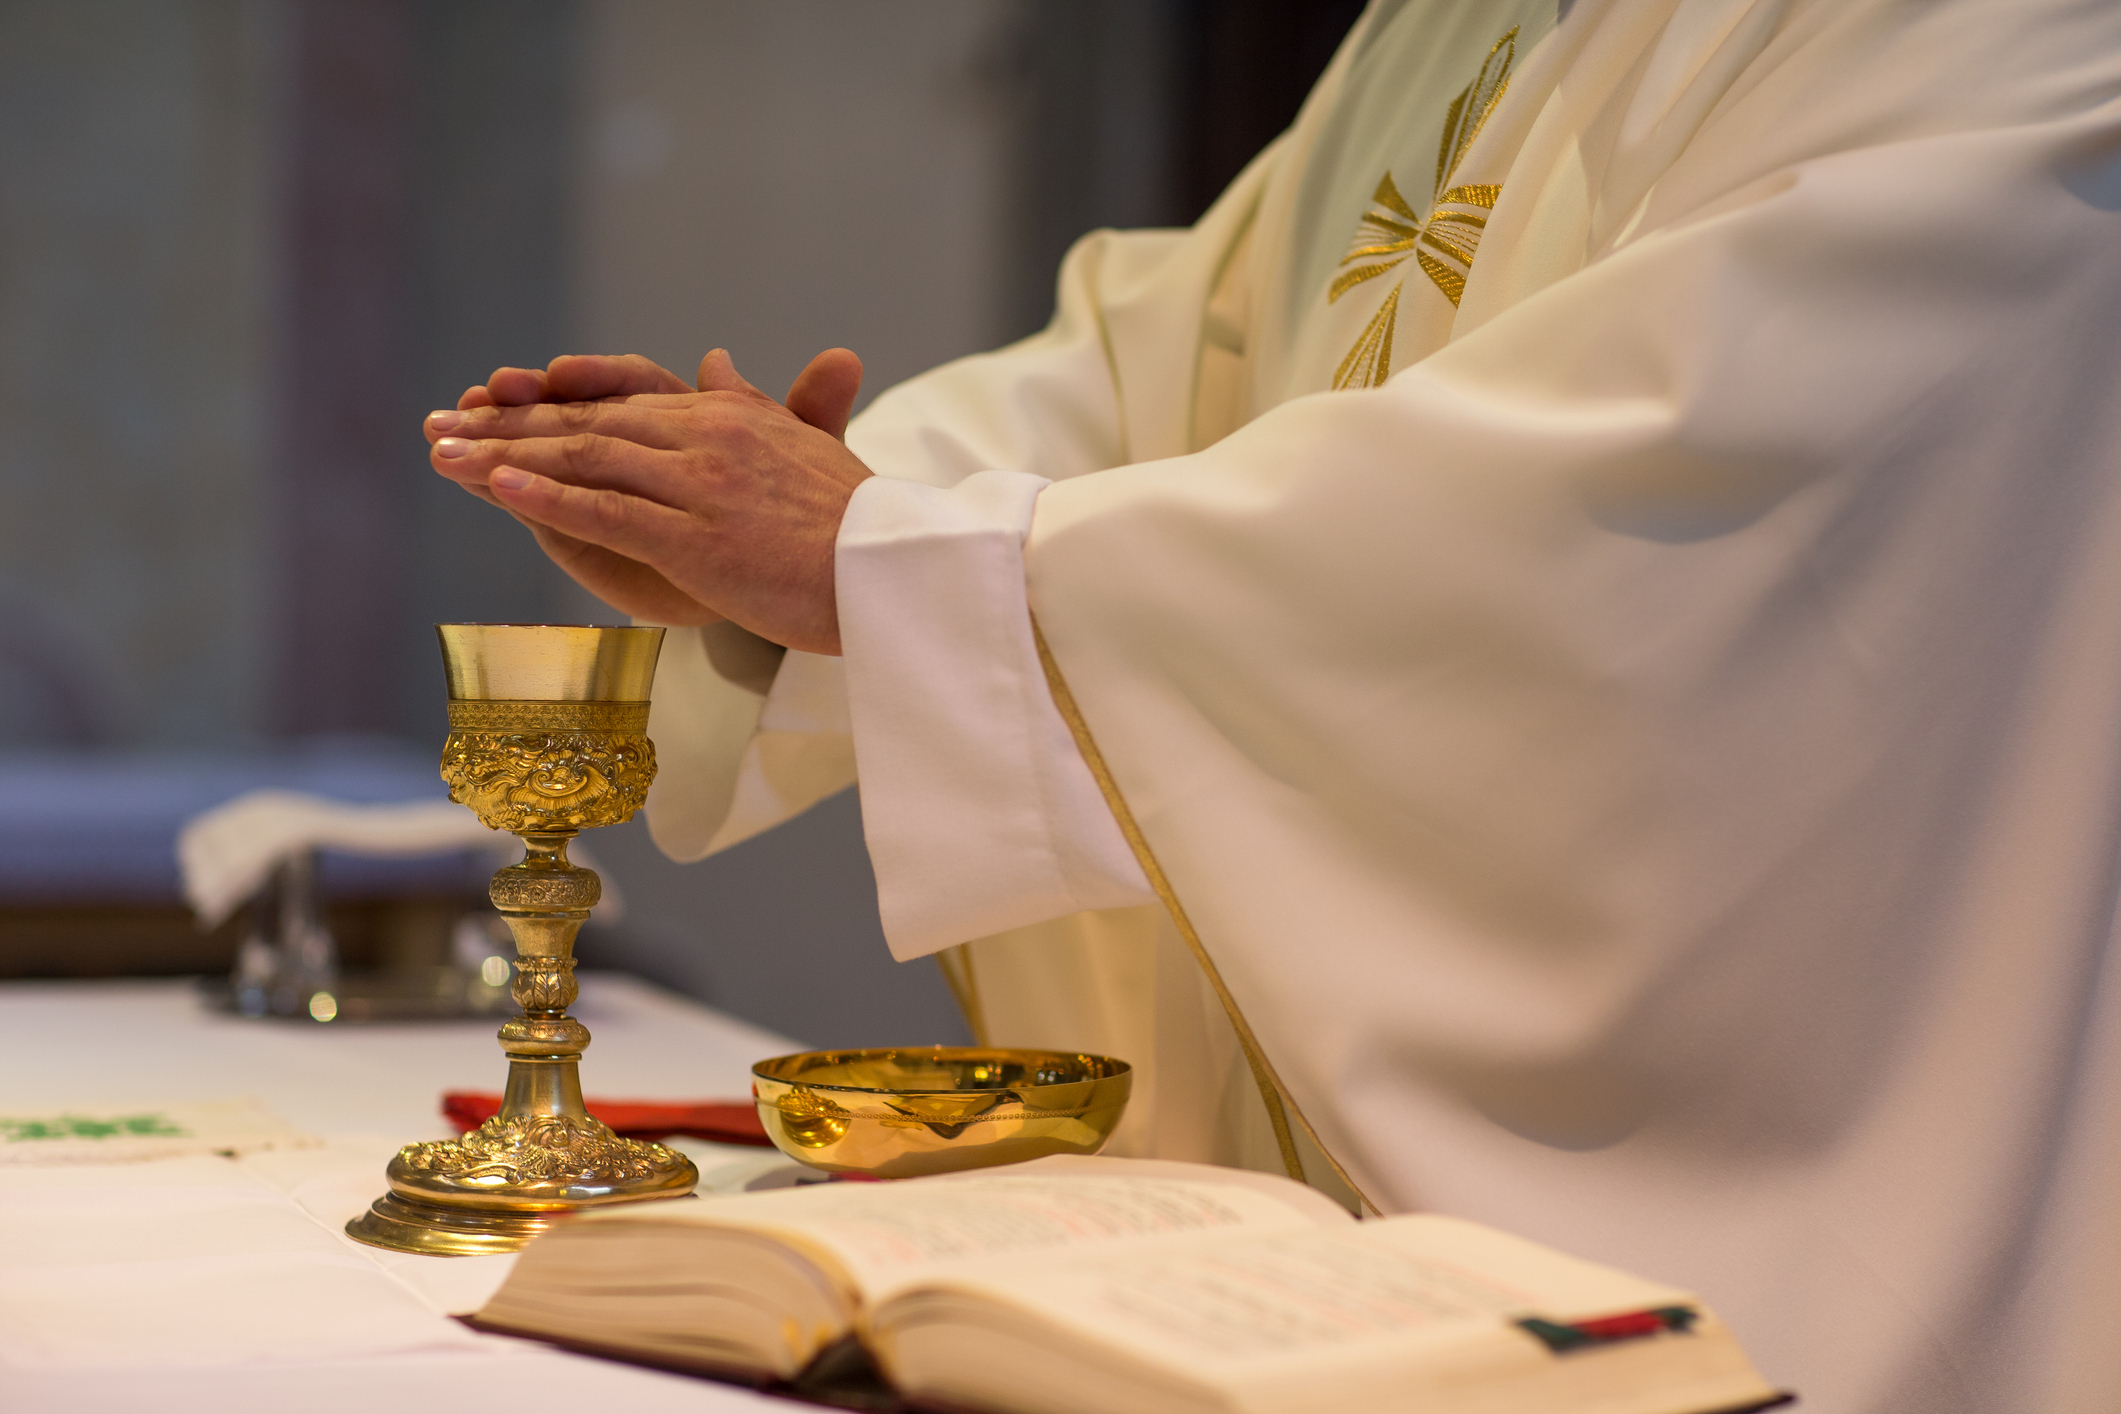 Priest in white robe with hands clasped in prayer over a chalice at an altar with an open book